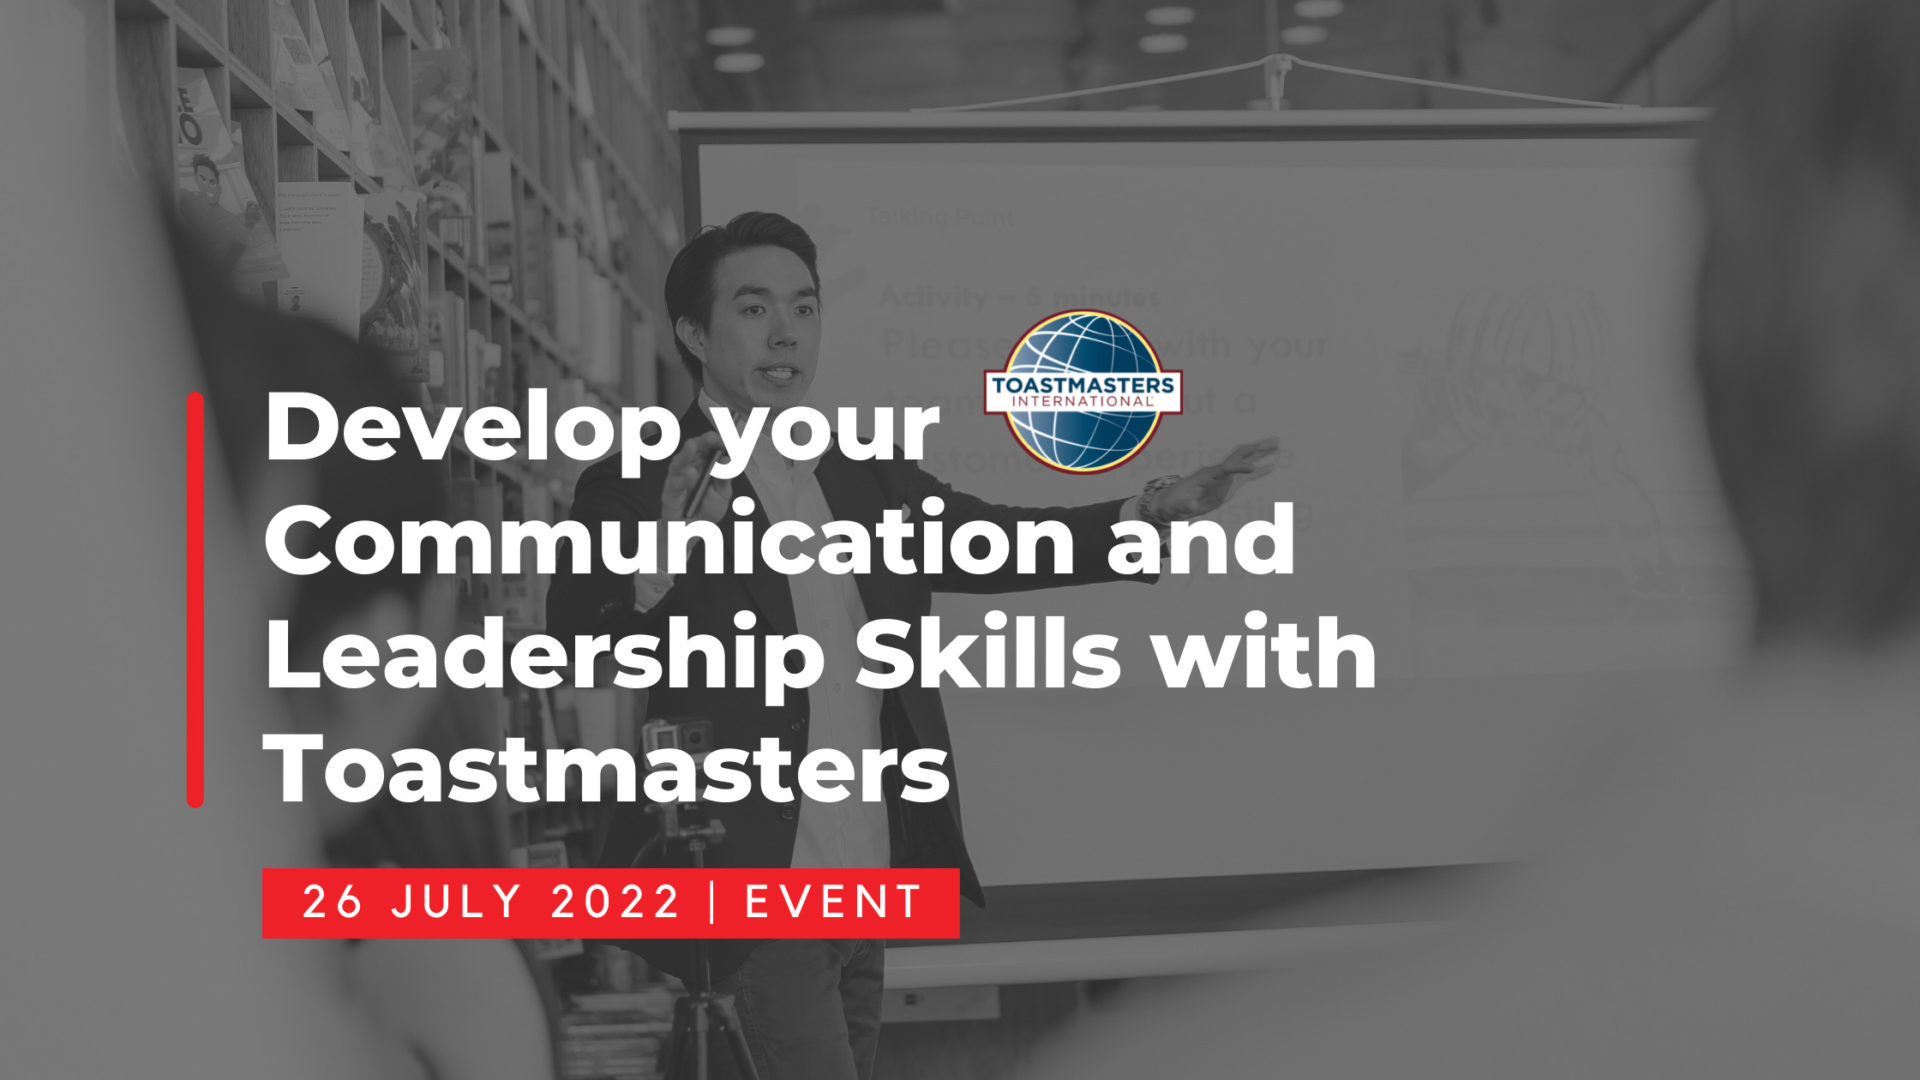 Develop your Communication and Leadership Skills with Toastmasters